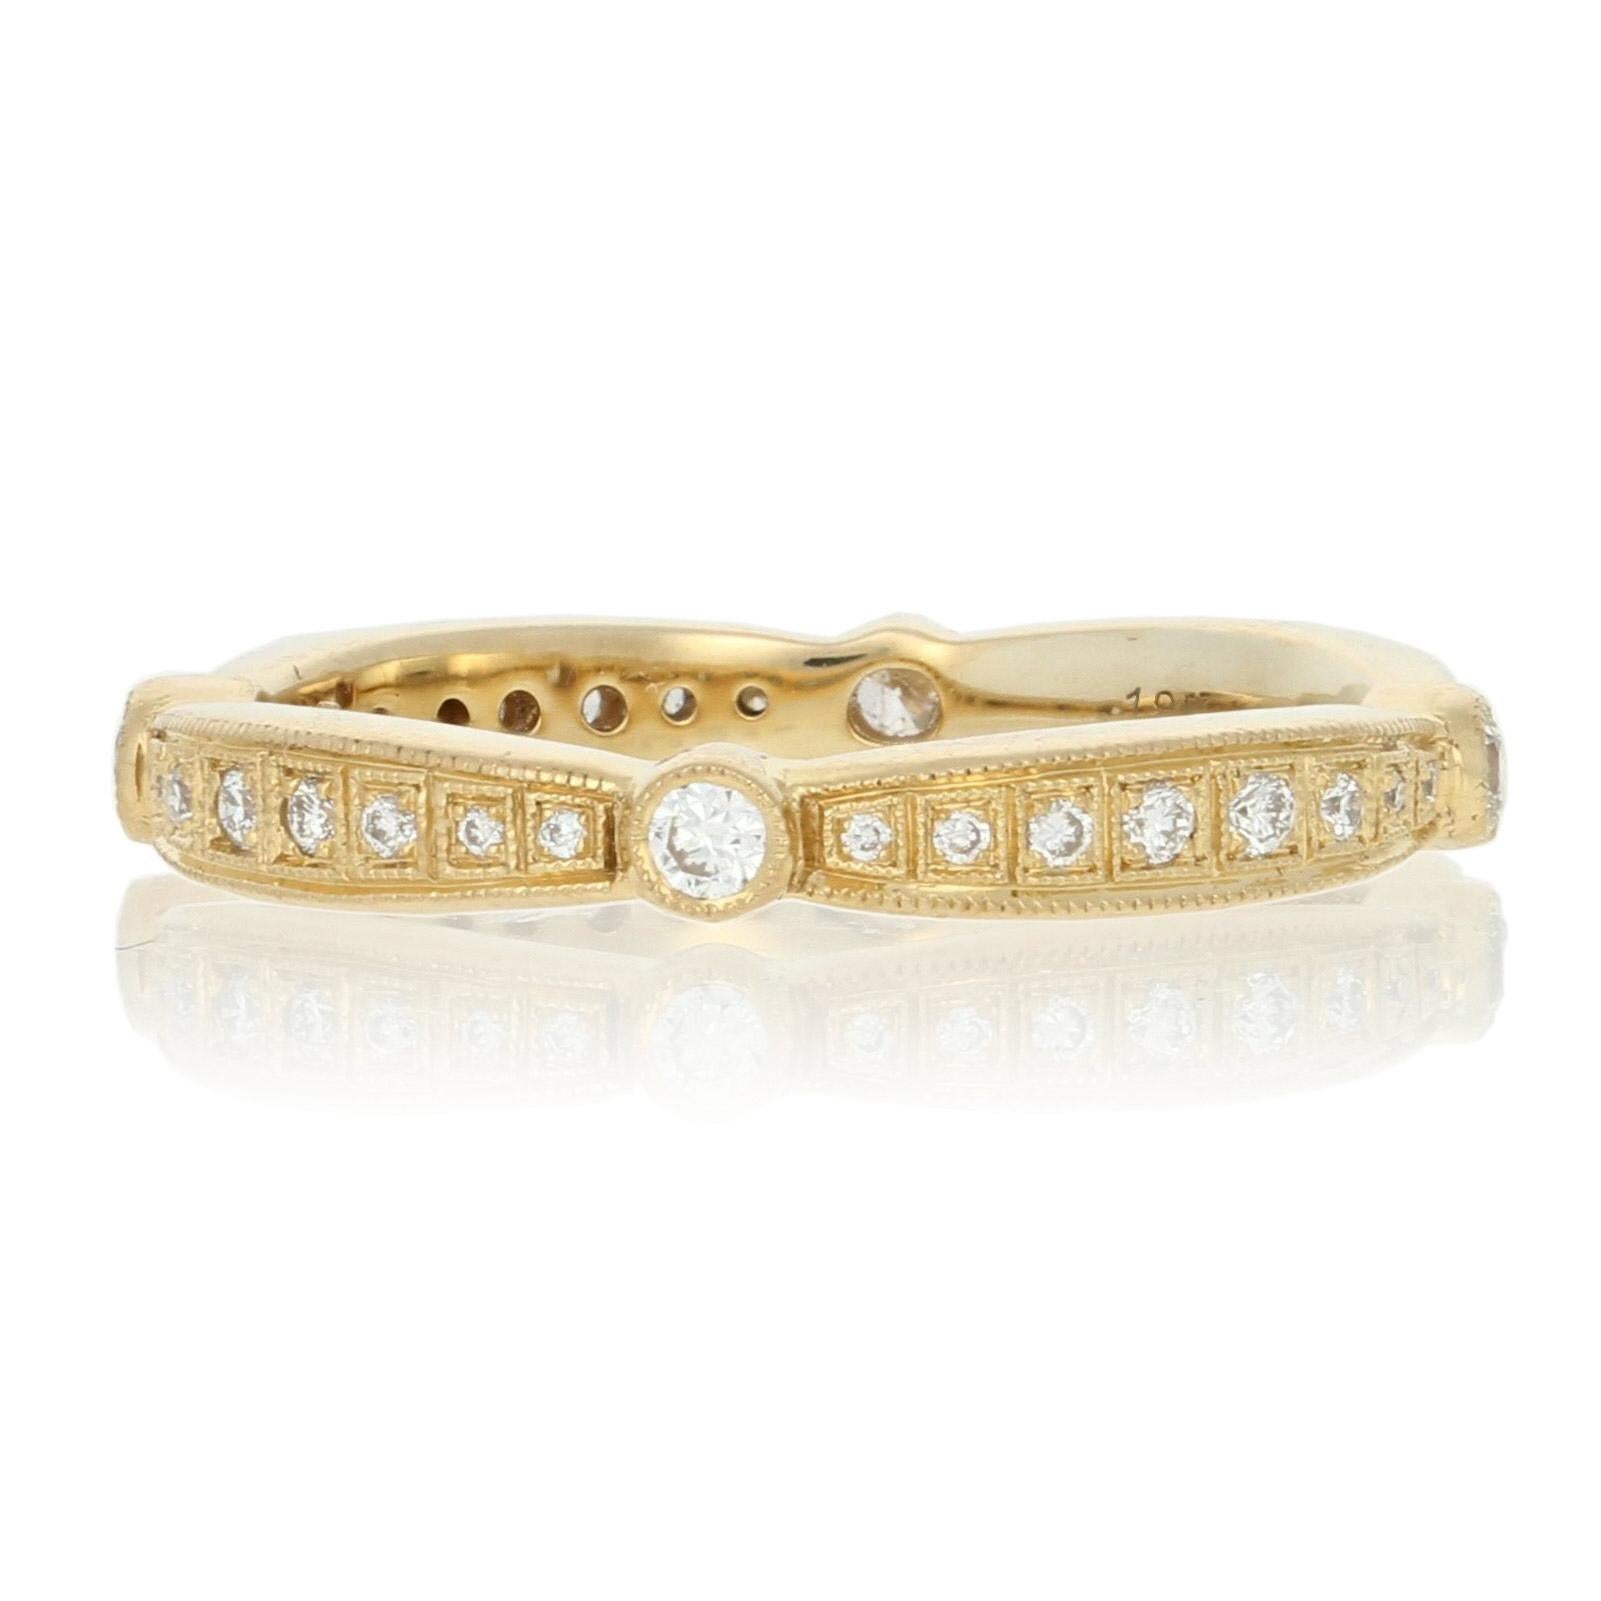 Size: 6 1/2

Brand: Beverly K.

Metal Content: Guaranteed 18k Gold as stamped

Stone Information: 
Natural Diamonds  
Clarity: VS1 - VS2 
Color: F   
Cut: Round Brilliant
Total Carats: 0.25ctw

Style: Eternity Wedding Band with Diamonds
Face Height